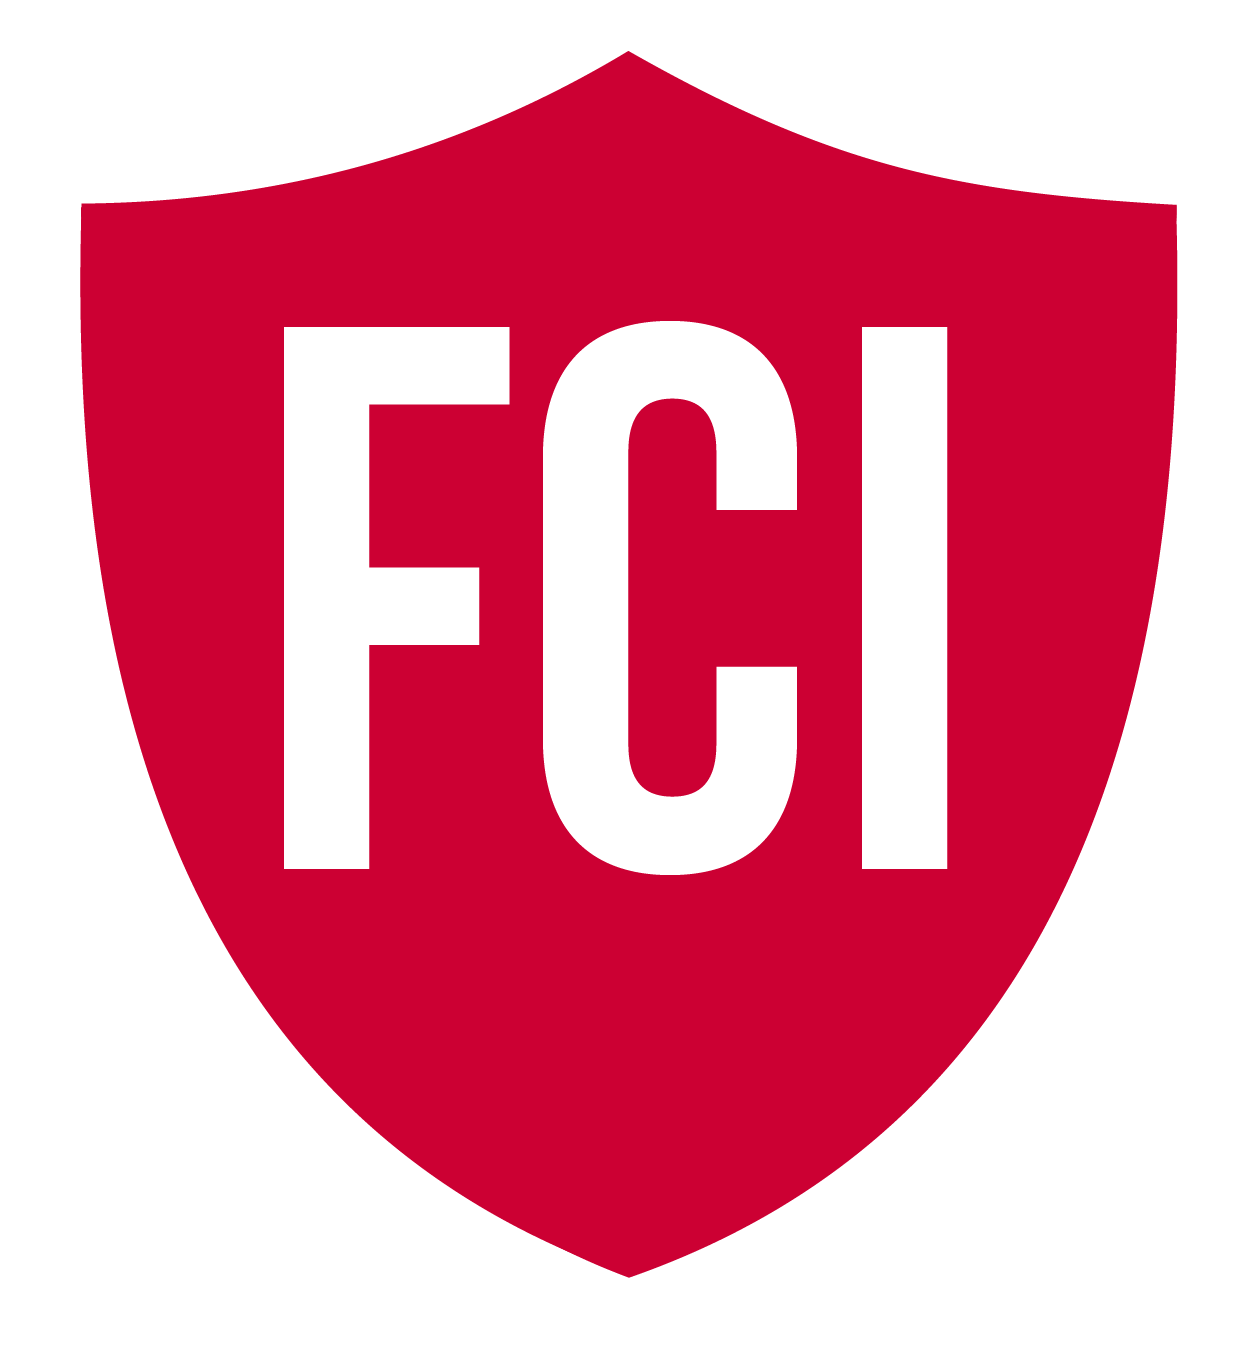 fci-is-a-cybersecurity-service-provider-that-meets-compliance-for-the